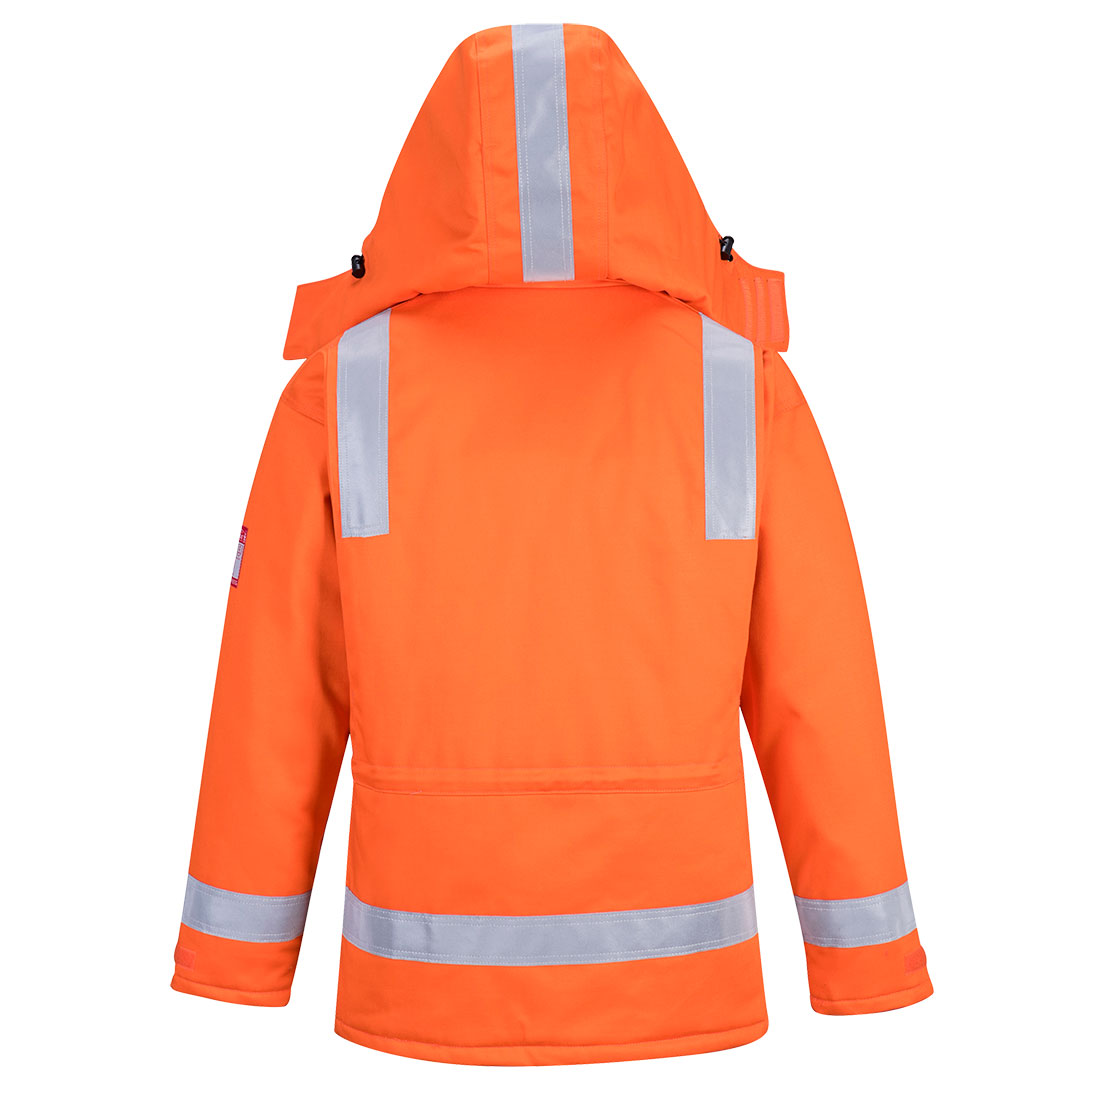 Flame Resistant Insulated Waterproof Winter Warming Jacket